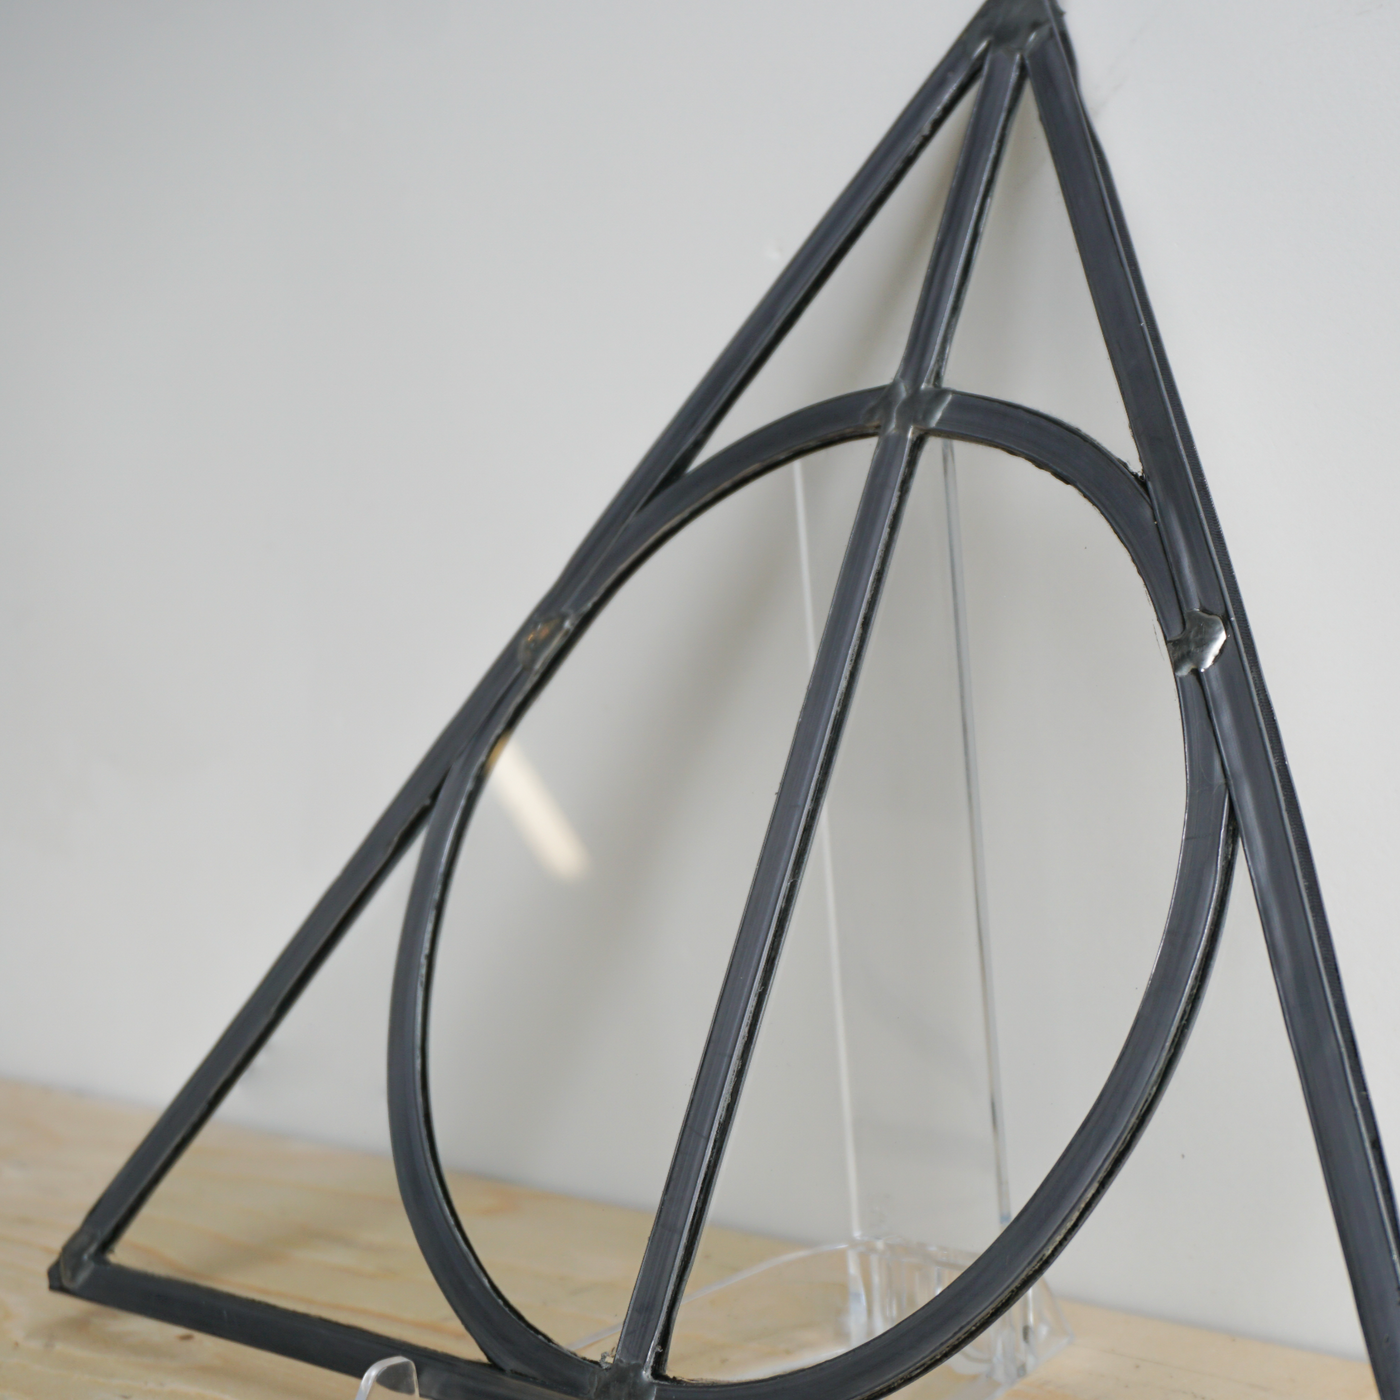 deathly hallows symbol stained glass art 4